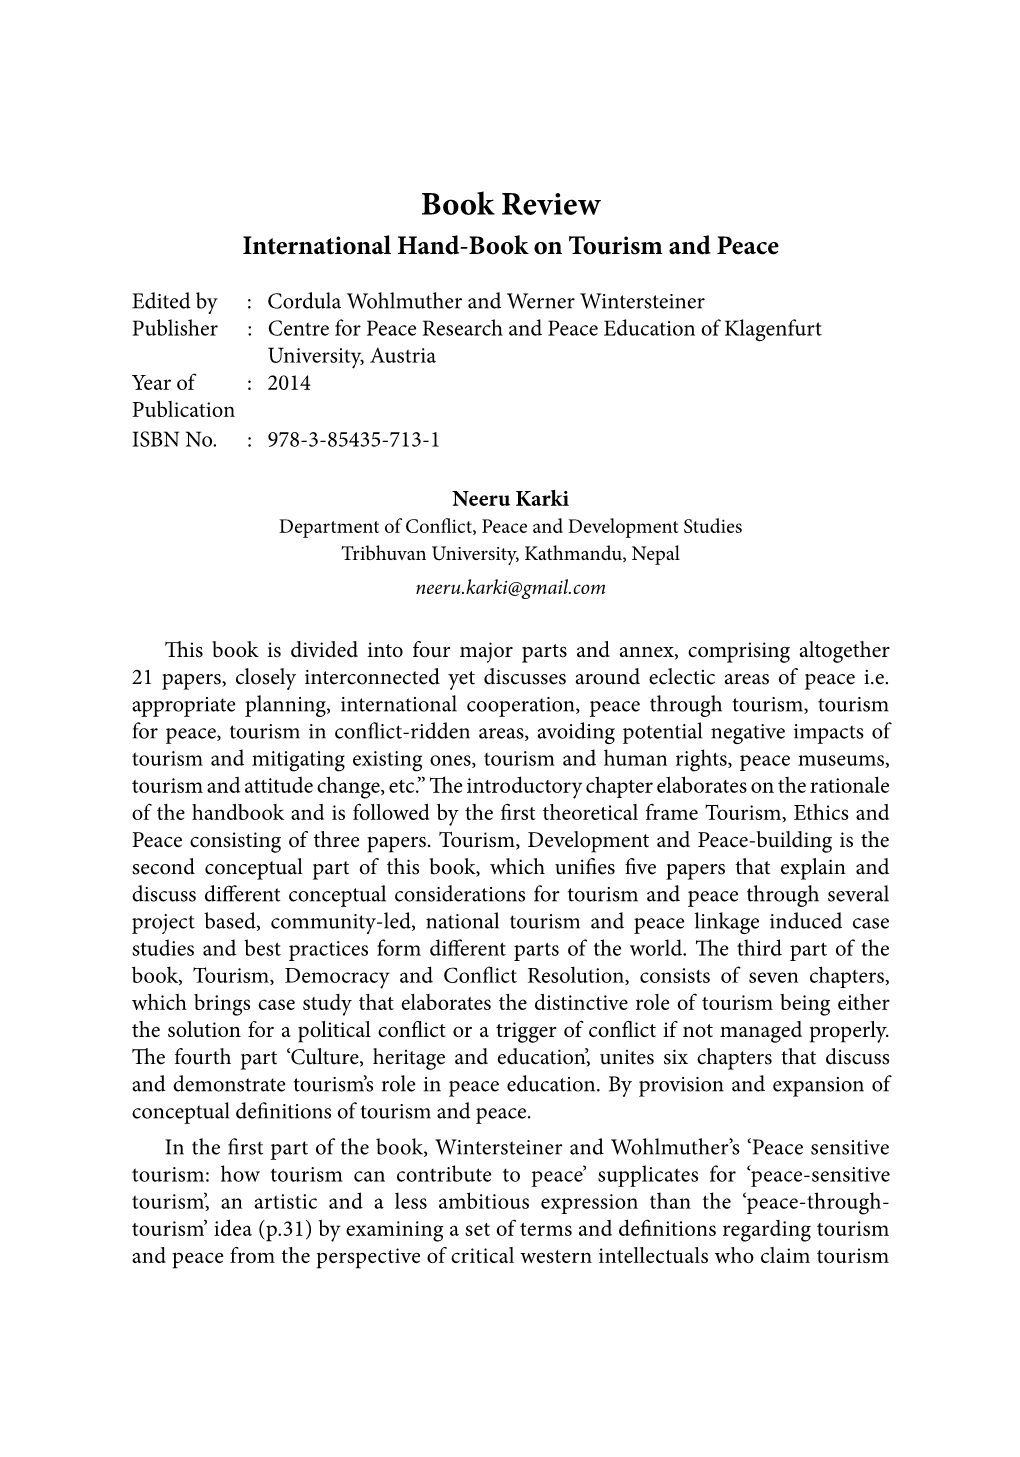 Book Review International Hand-Book on Tourism and Peace